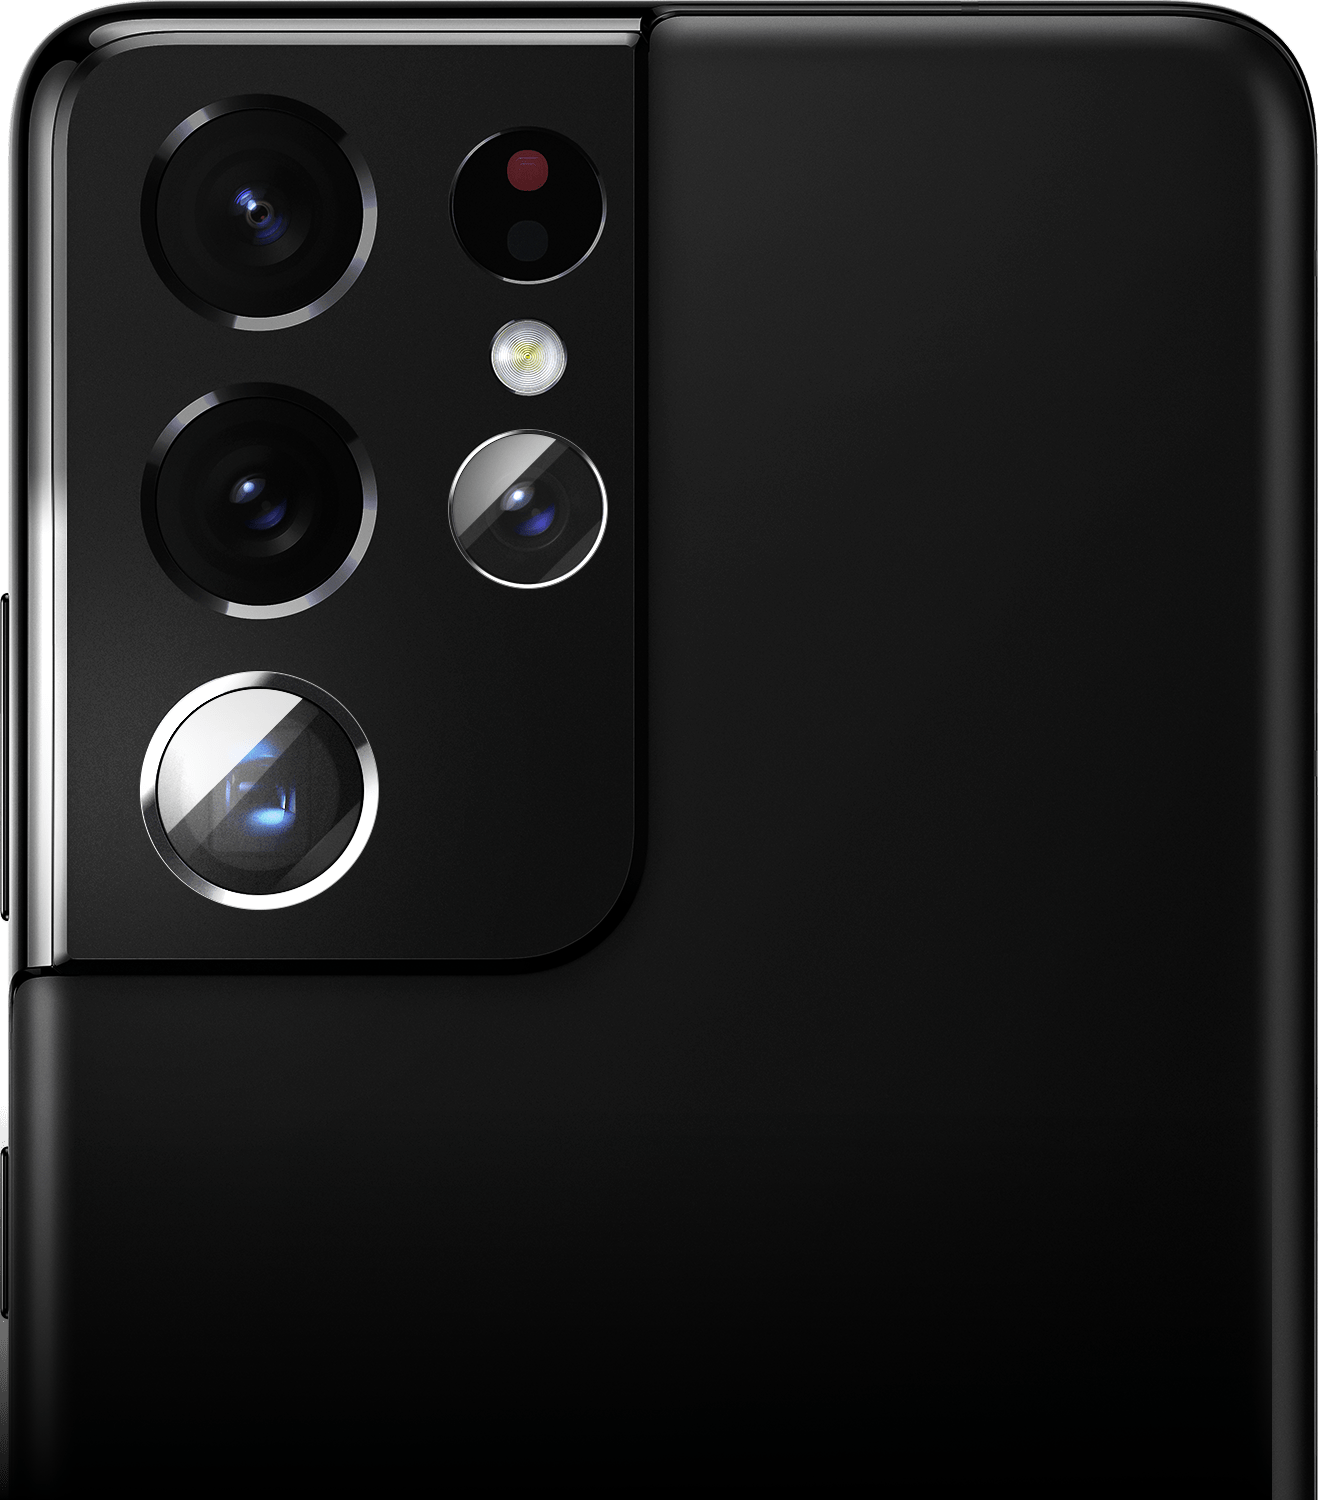 Close-up of rear camera on Galaxy S21 Ultra 5G in Phantom Black with Telephoto Cameras highlighted.